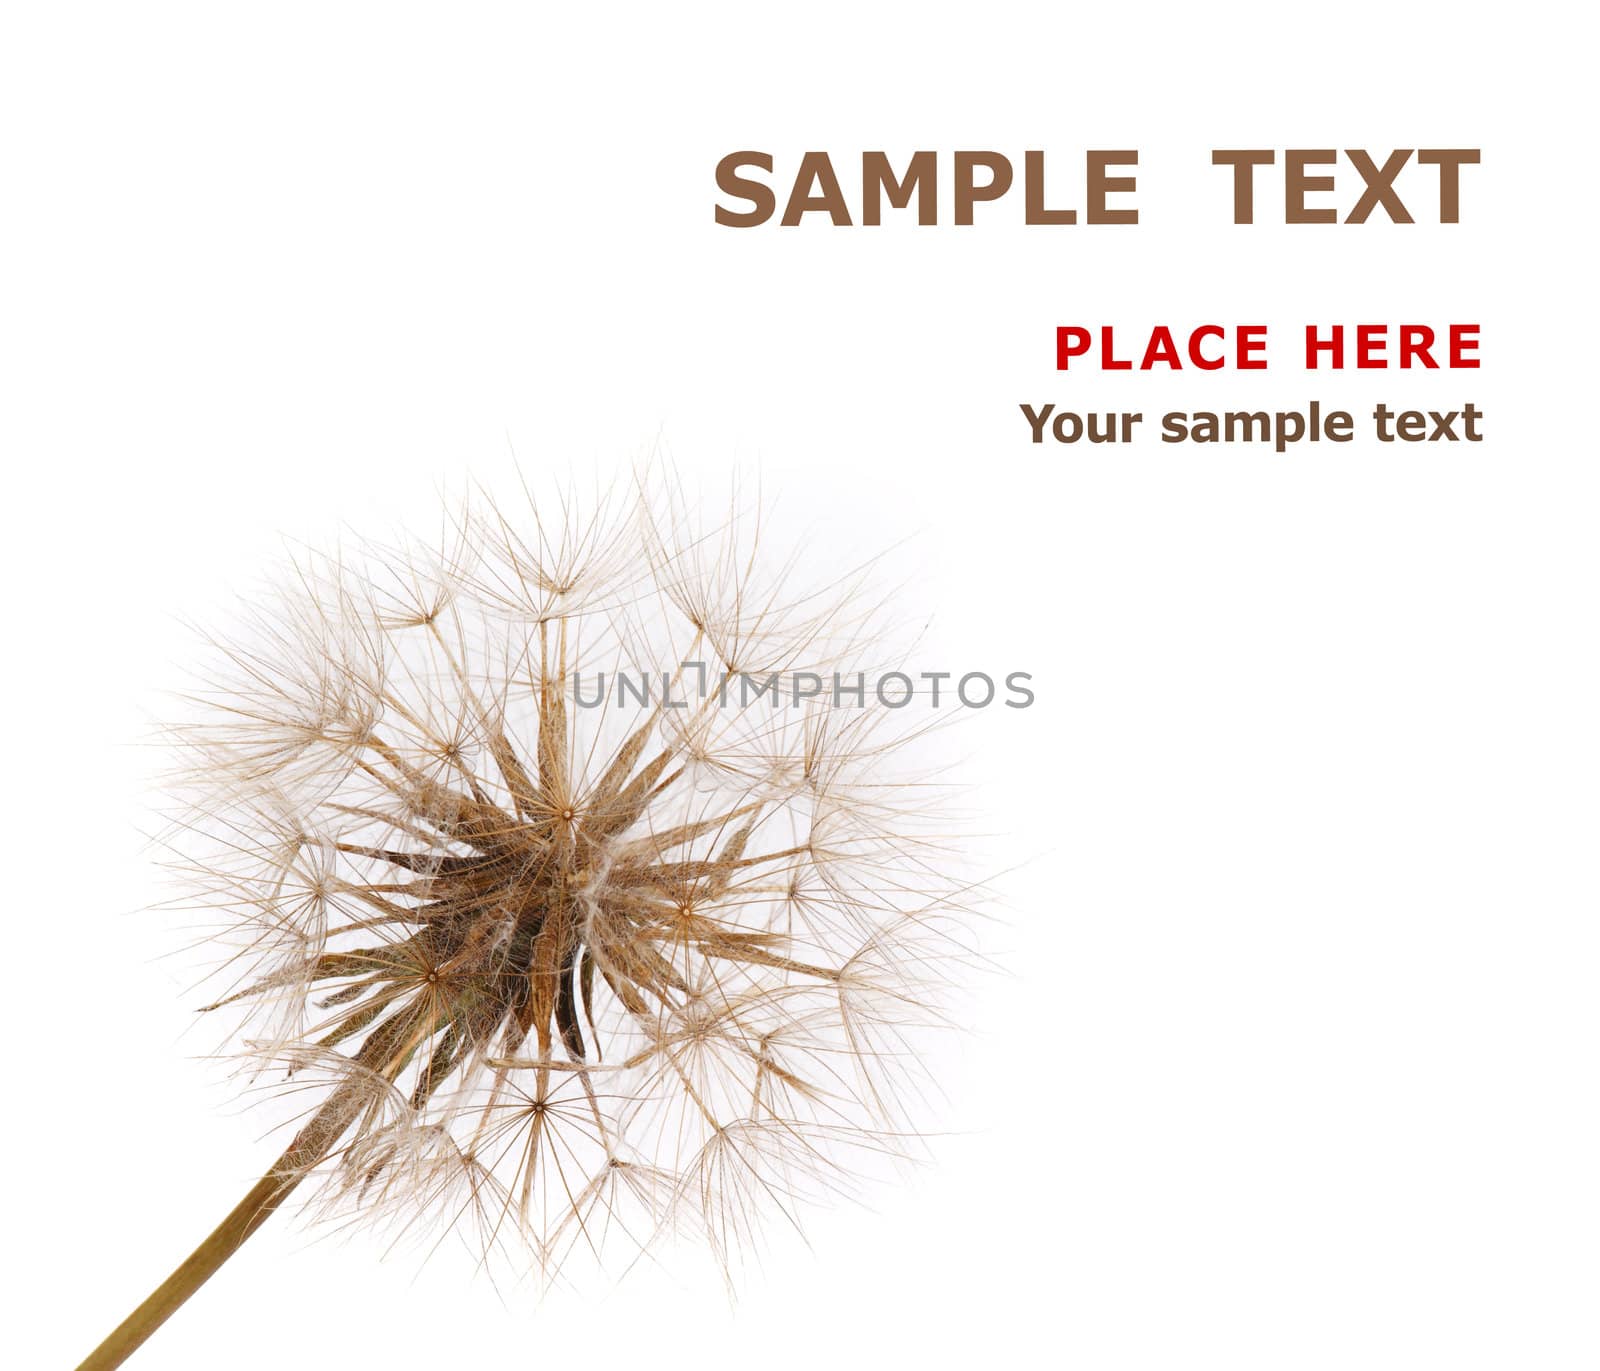 Close up of a dry dandelion on white background with place for your some text. 